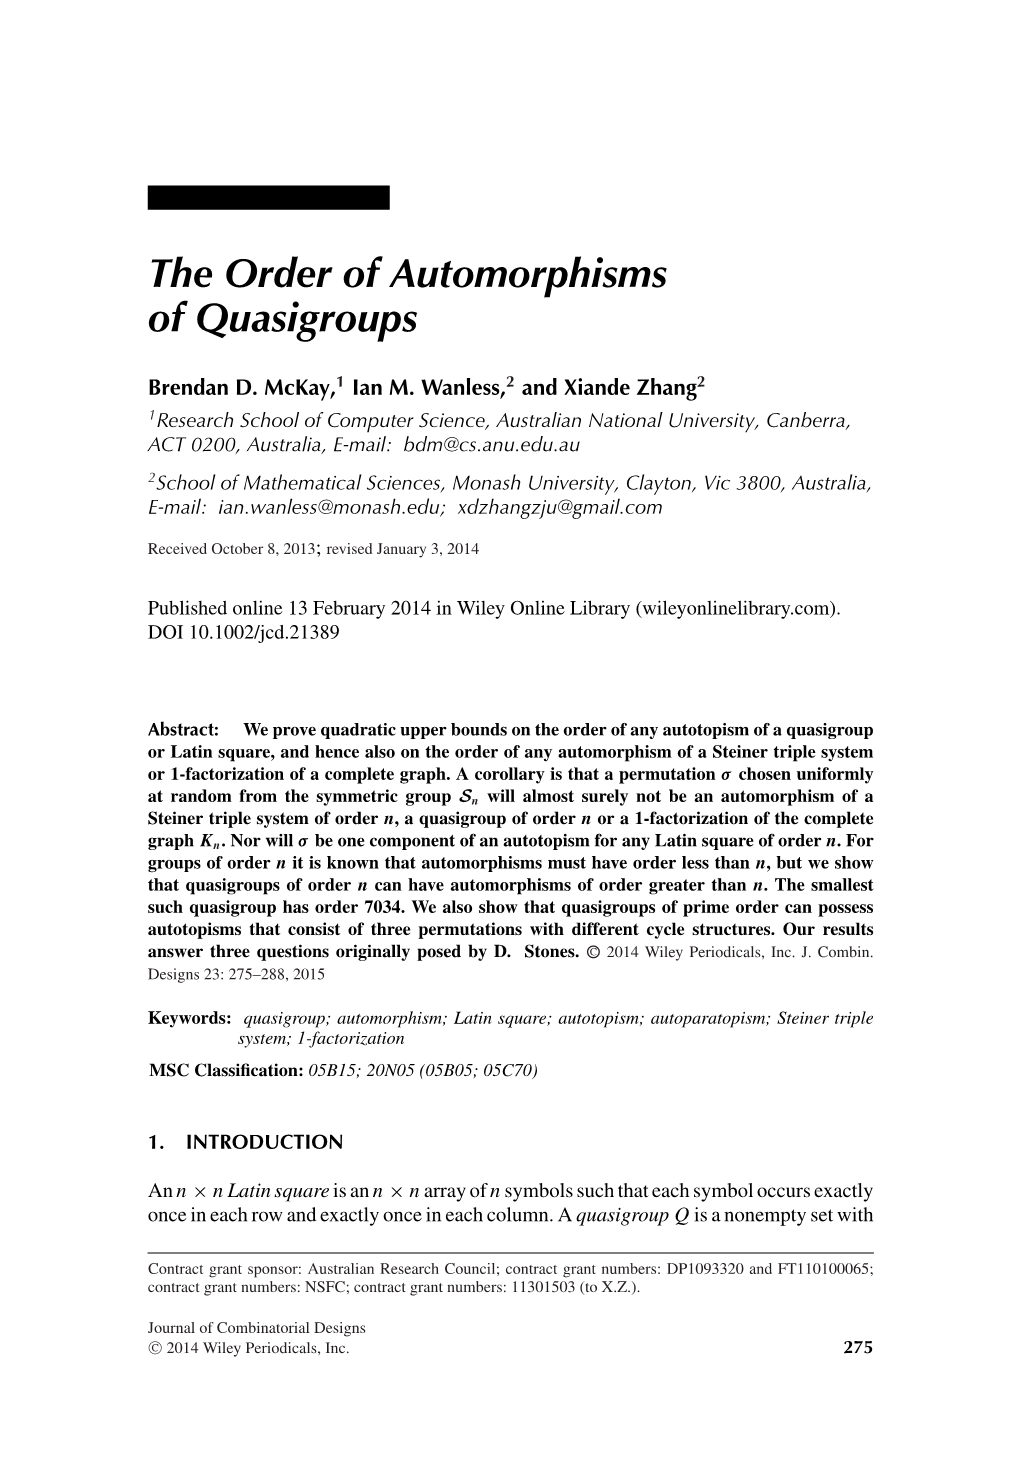 The Order of Automorphisms of Quasigroups